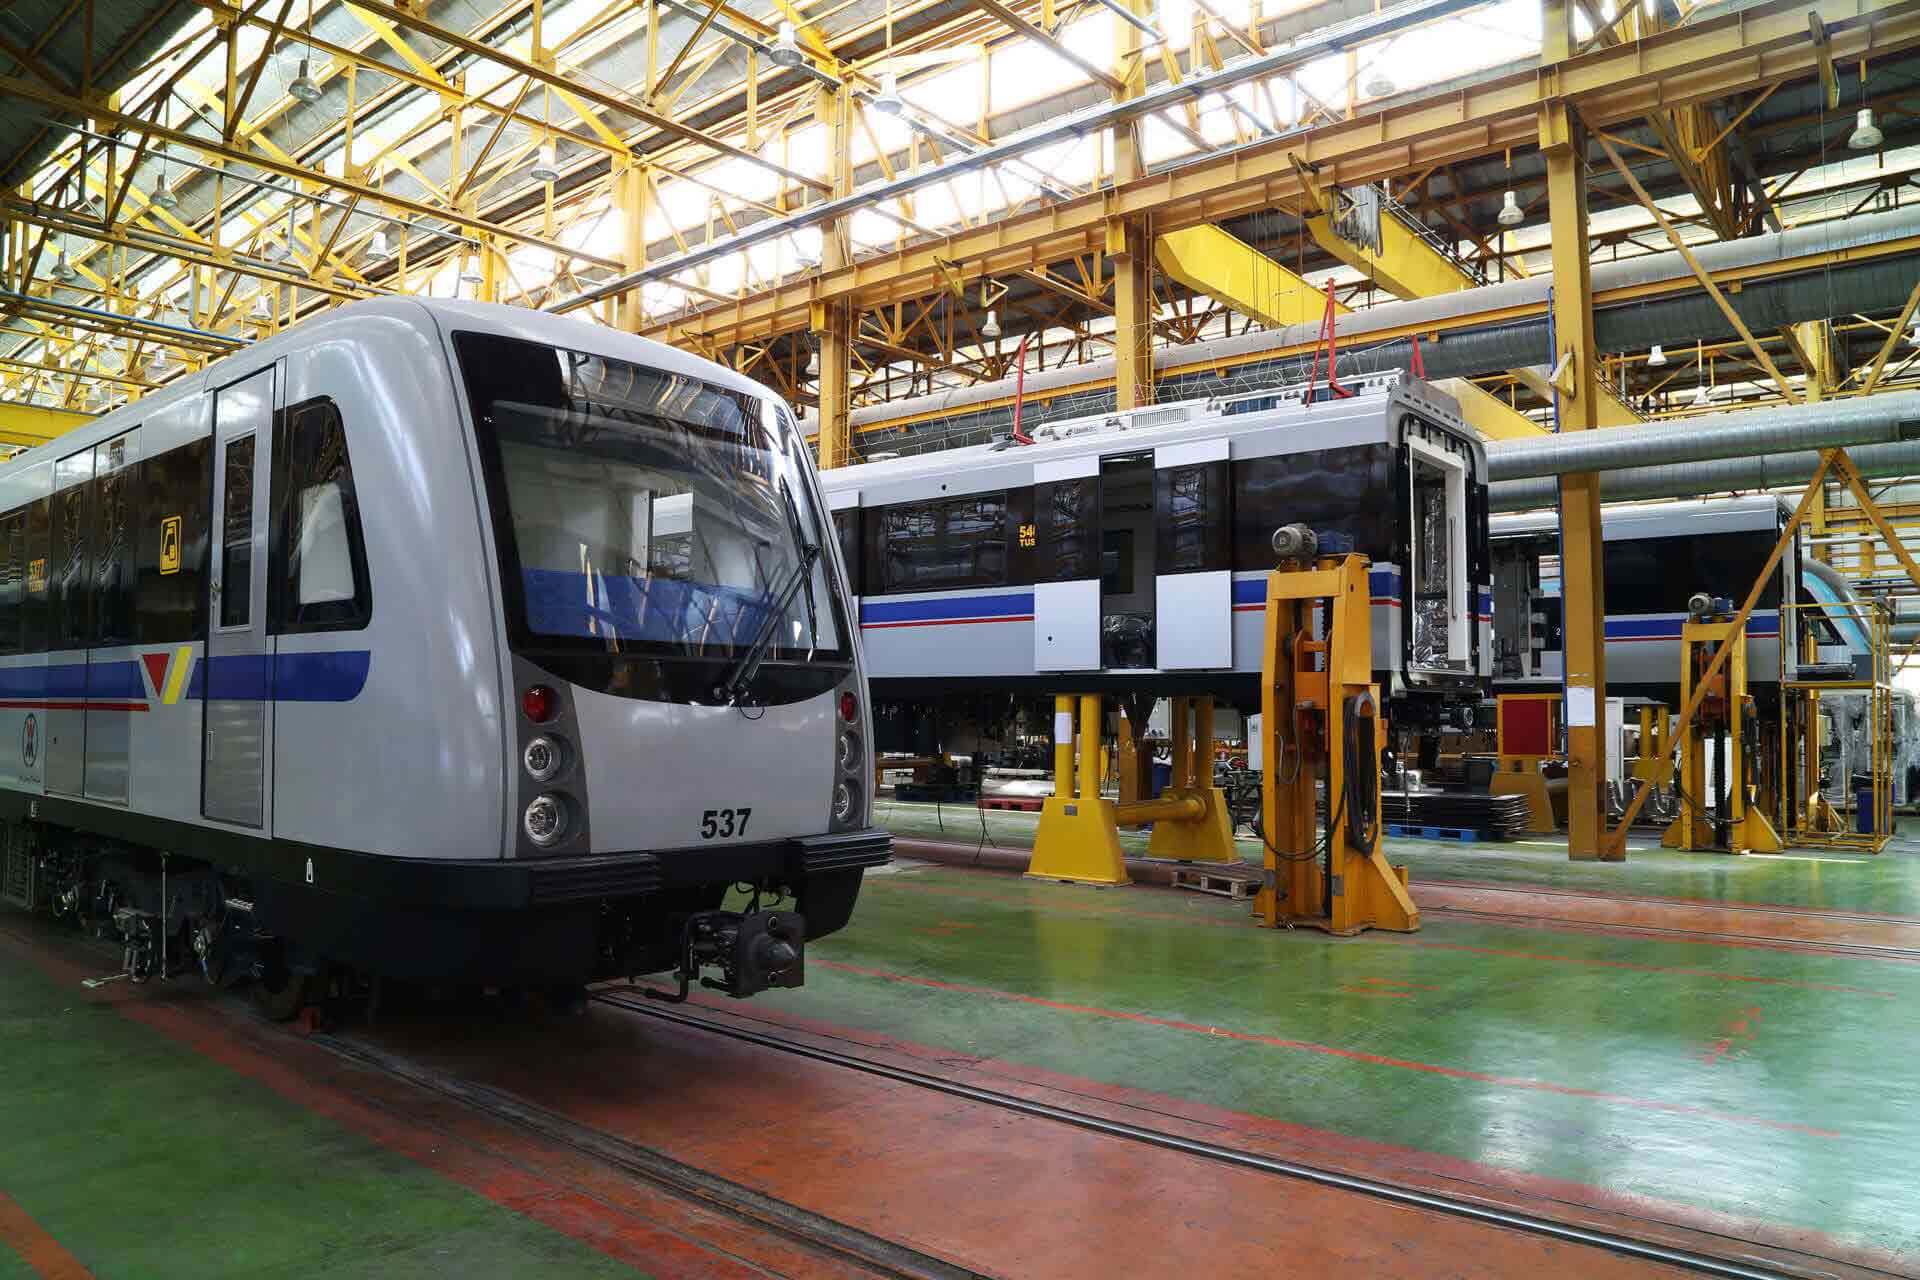 Manufacturing and assembly of rolling stock